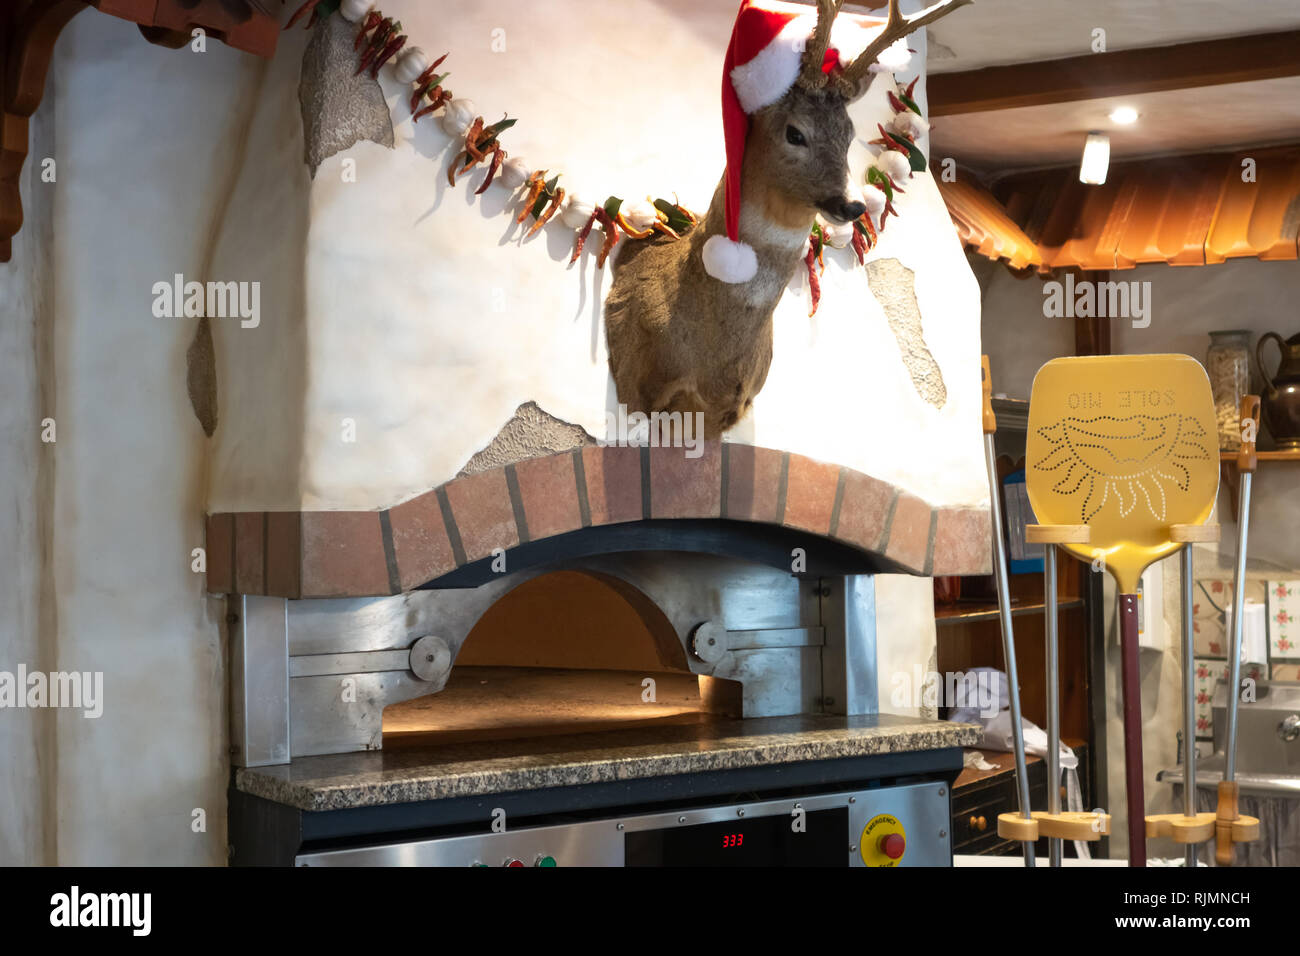 The pizza oven in the city cafe is ready for work Stock Photo